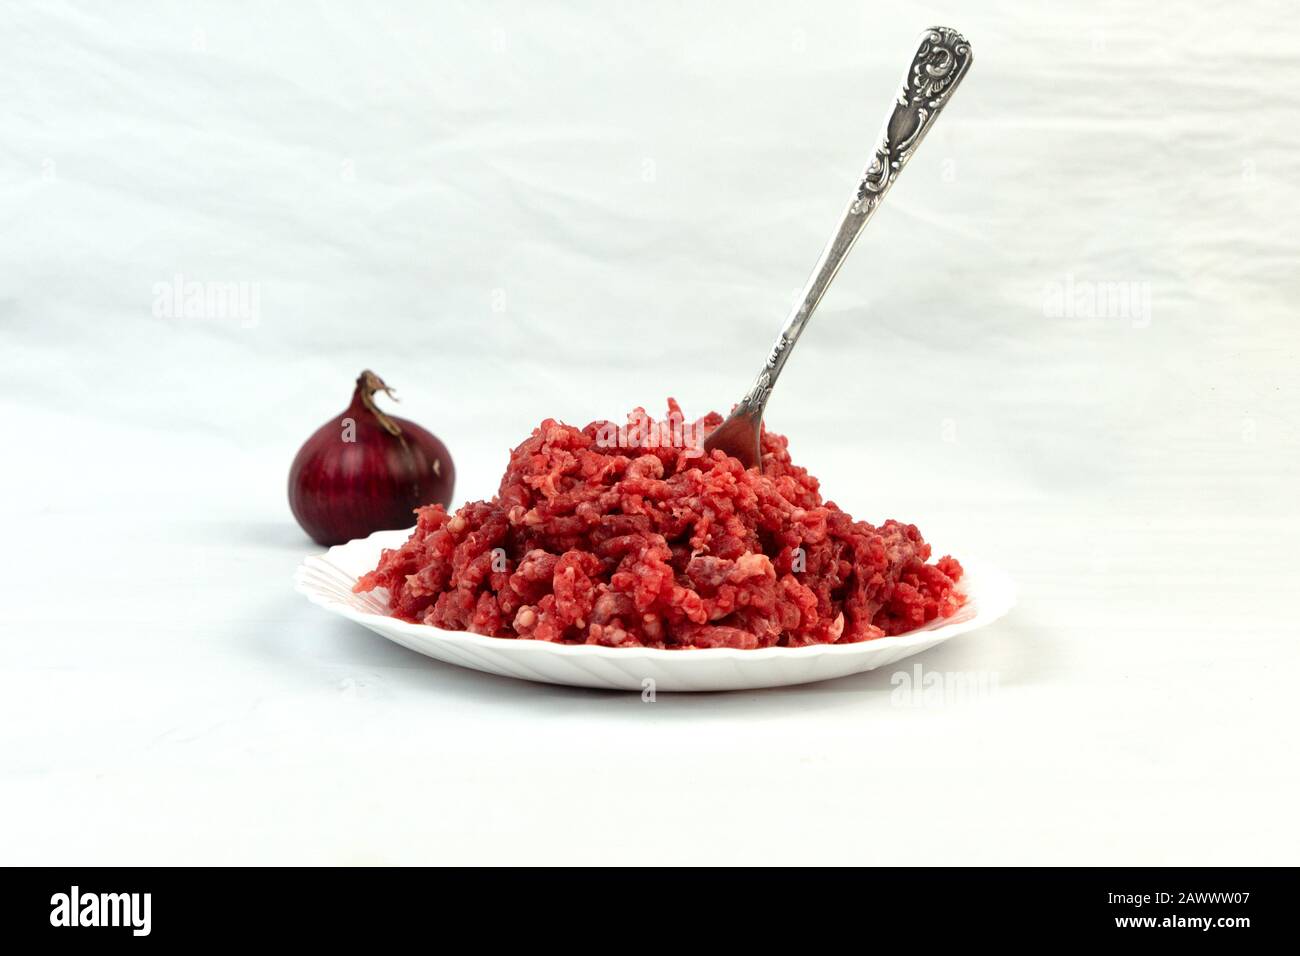 Carnivore diet. Raw ground beef lies on a plate. Minced meat. Conception carnivor. Stock Photo